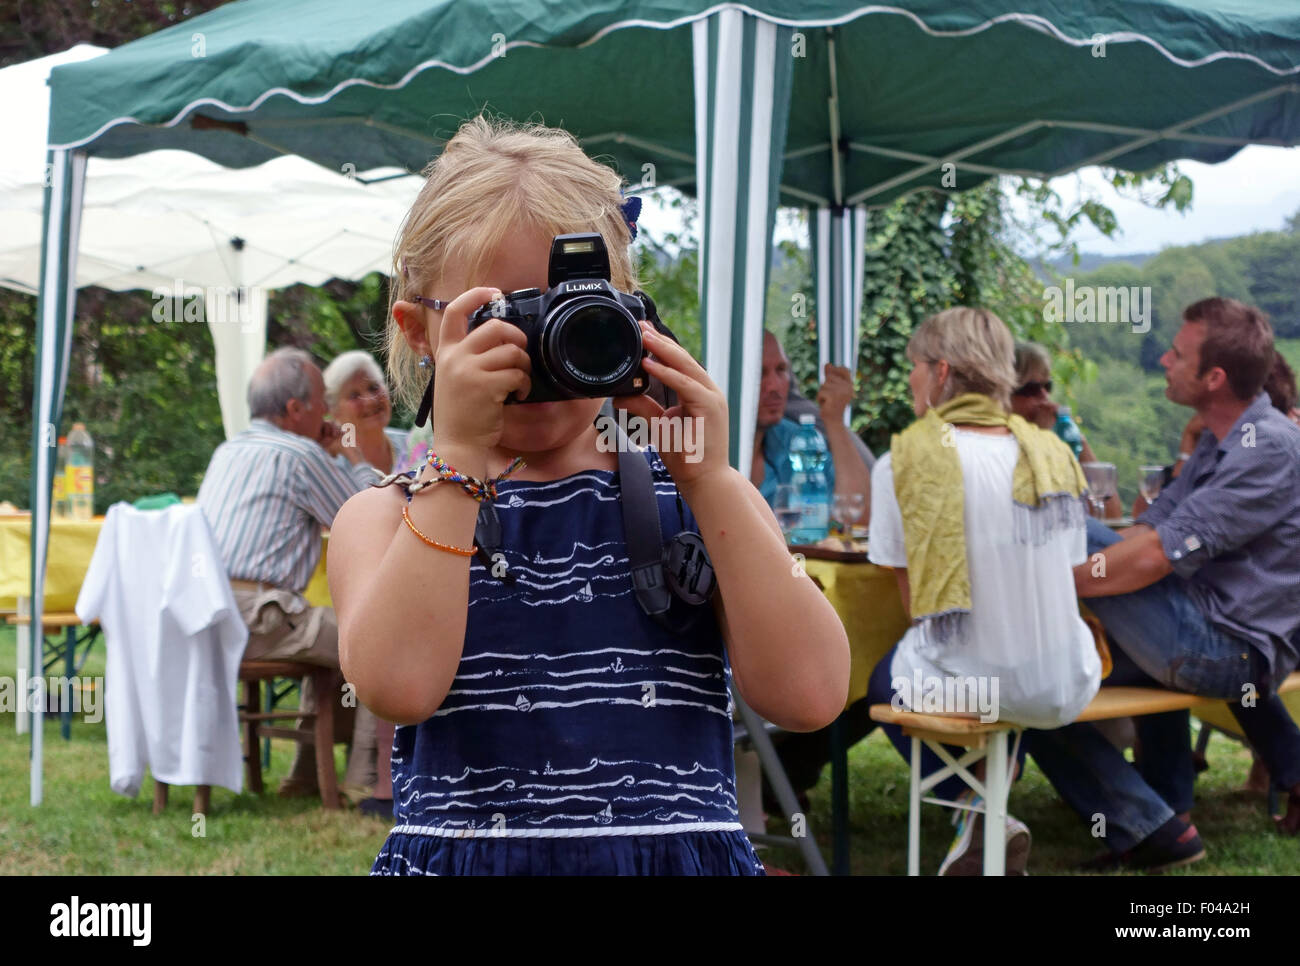 Child using DSLR camera at garden party in France Stock Photo